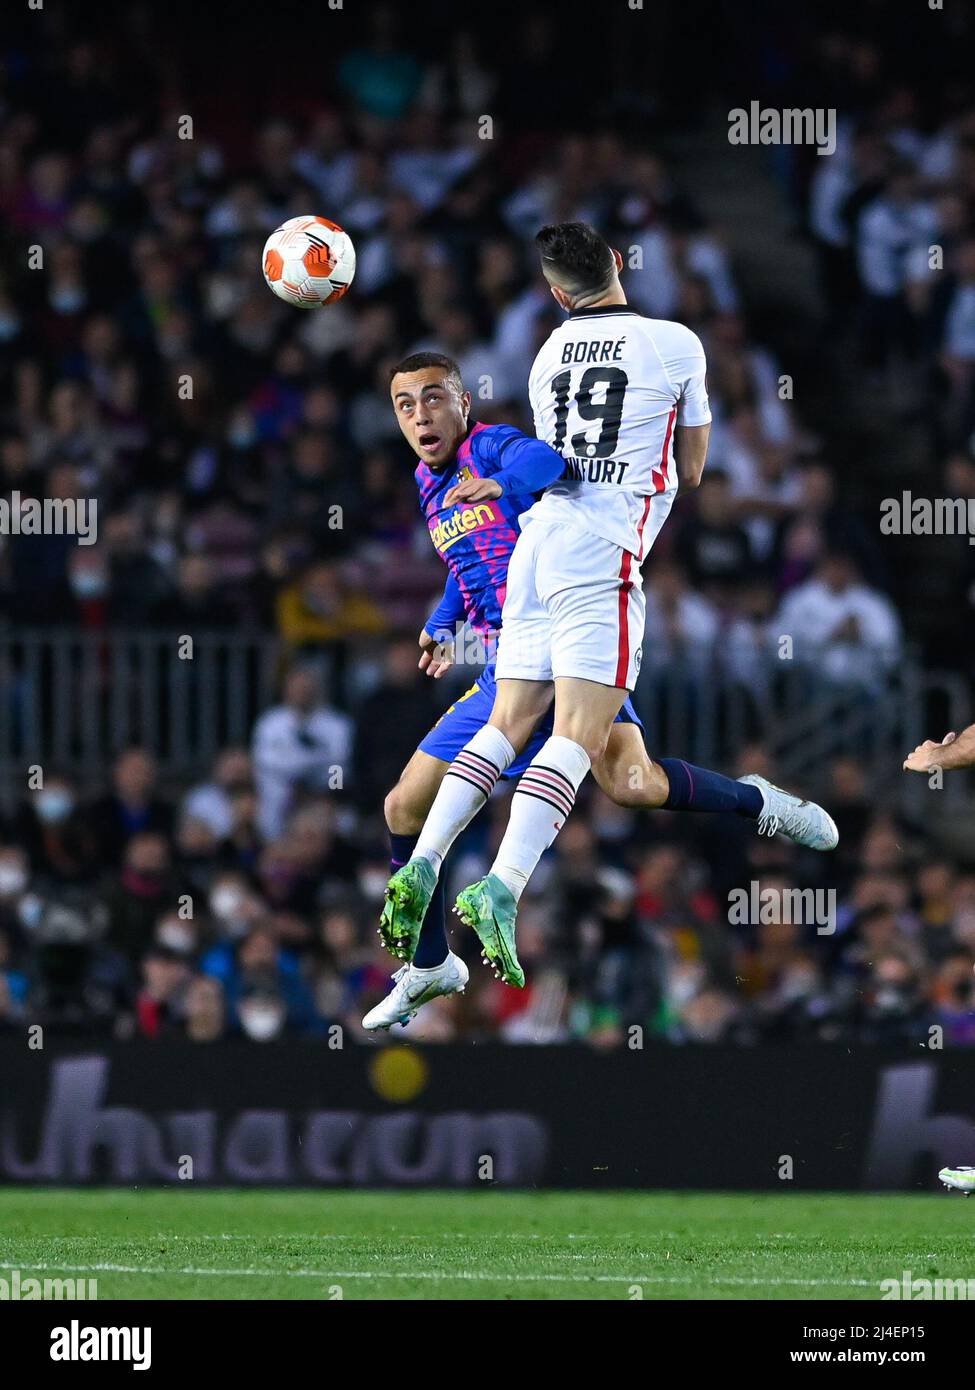 Serginho Dest of FC Barcelona in action with Rafael Borre of Eintracht Frankfurt during the UEFA Europa League Quarter Final Leg Two match between FC Barcelona and Eintracht Frankfurt at Camp Nou in Barcelona Stock Photo